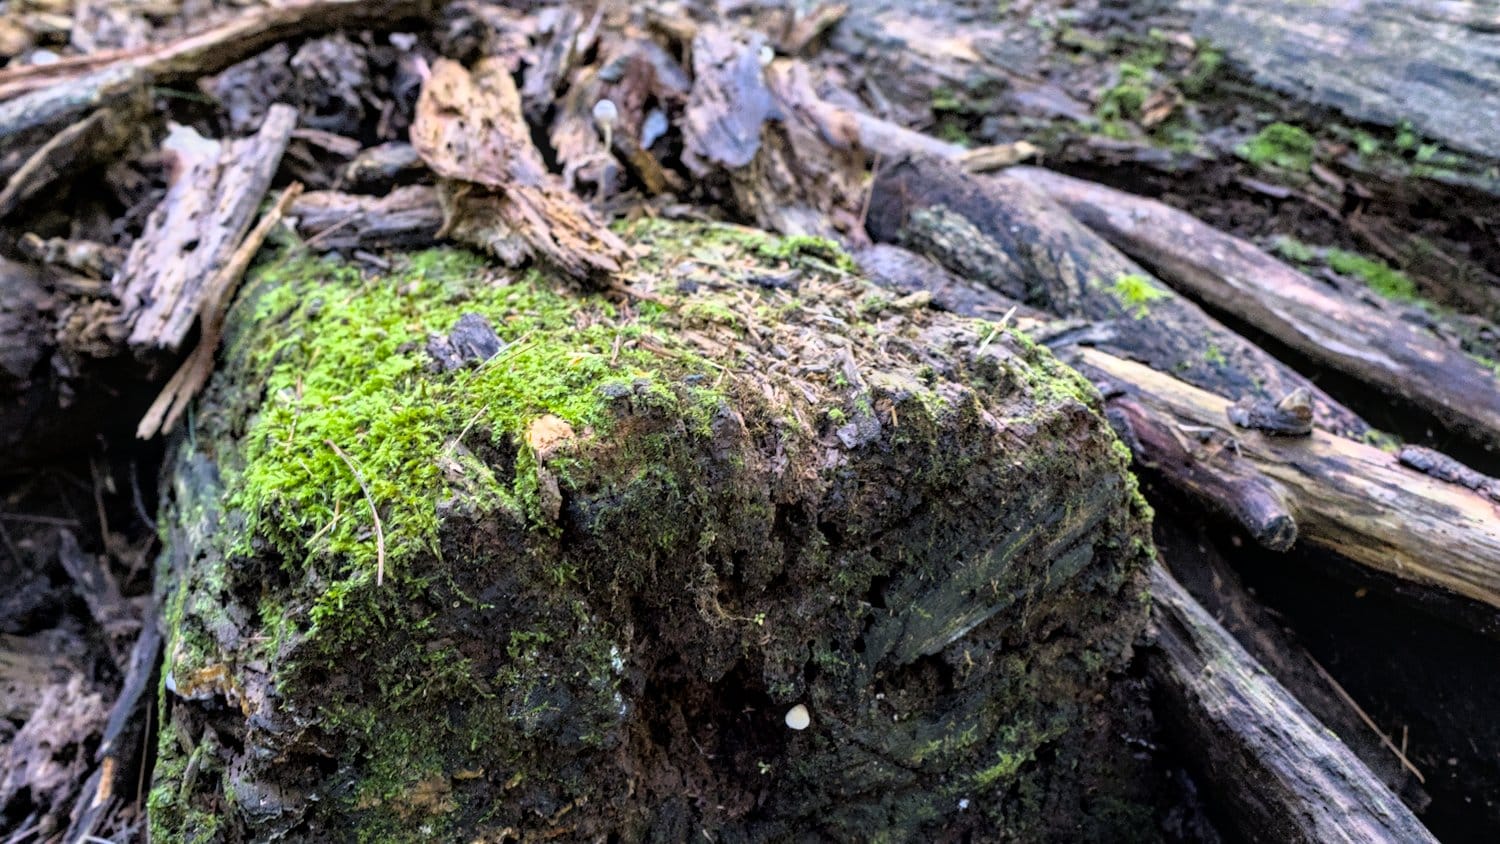 Moss growing over the remains of fallen trees.